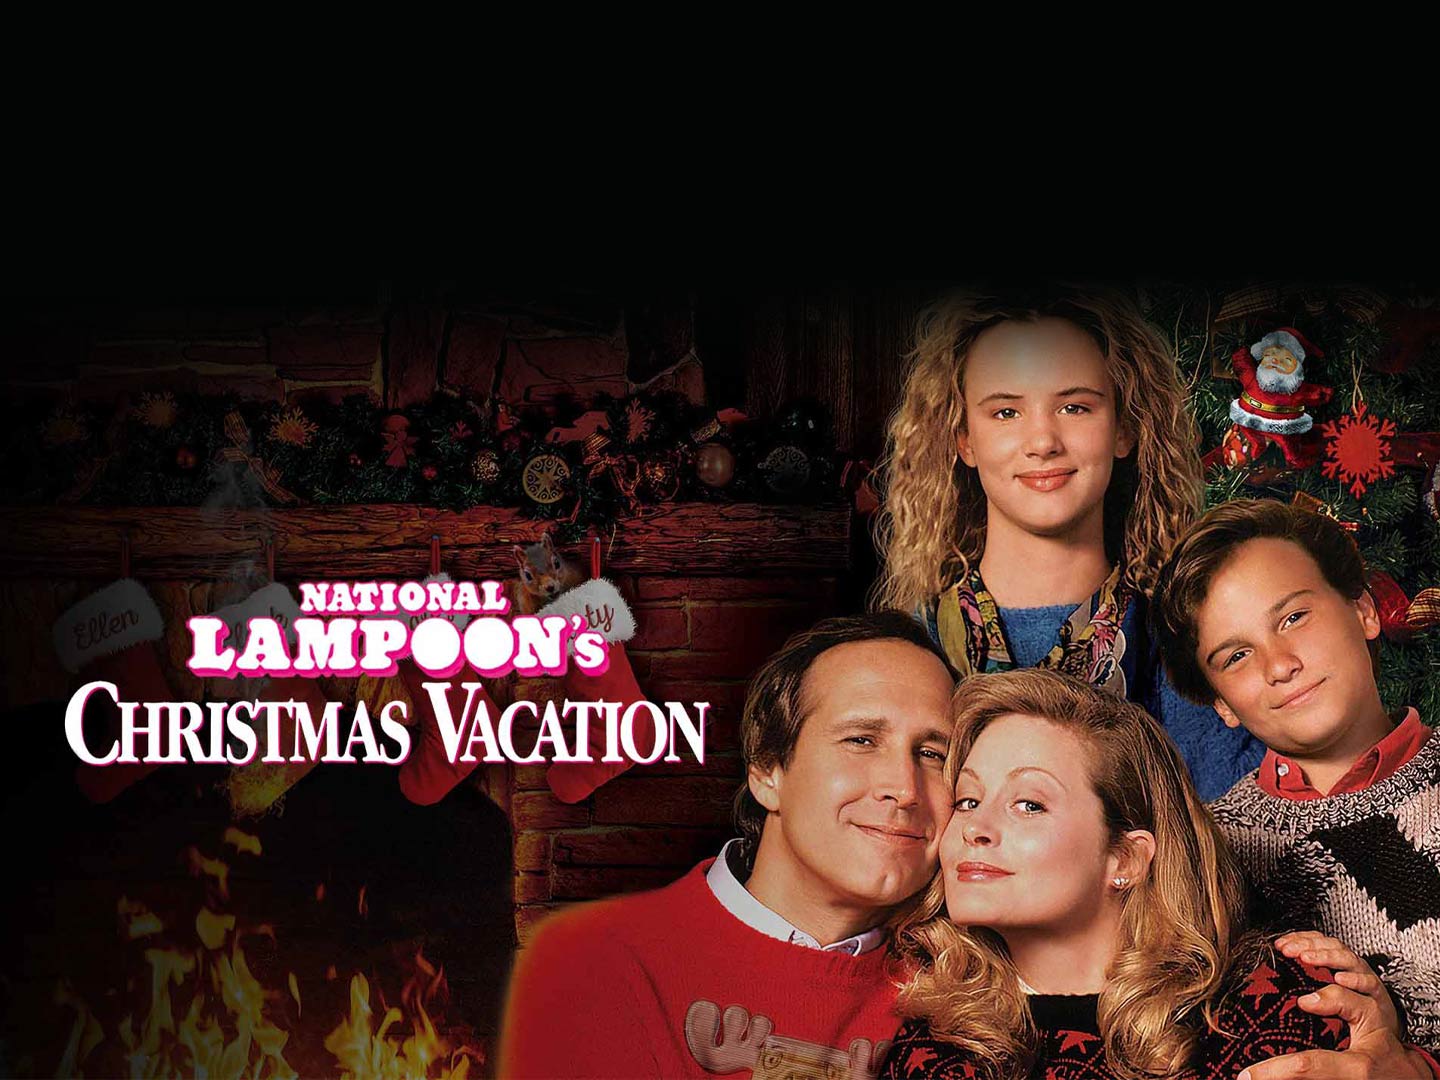 Capitol Cinema presents: National Lampoon's Christmas Vacation